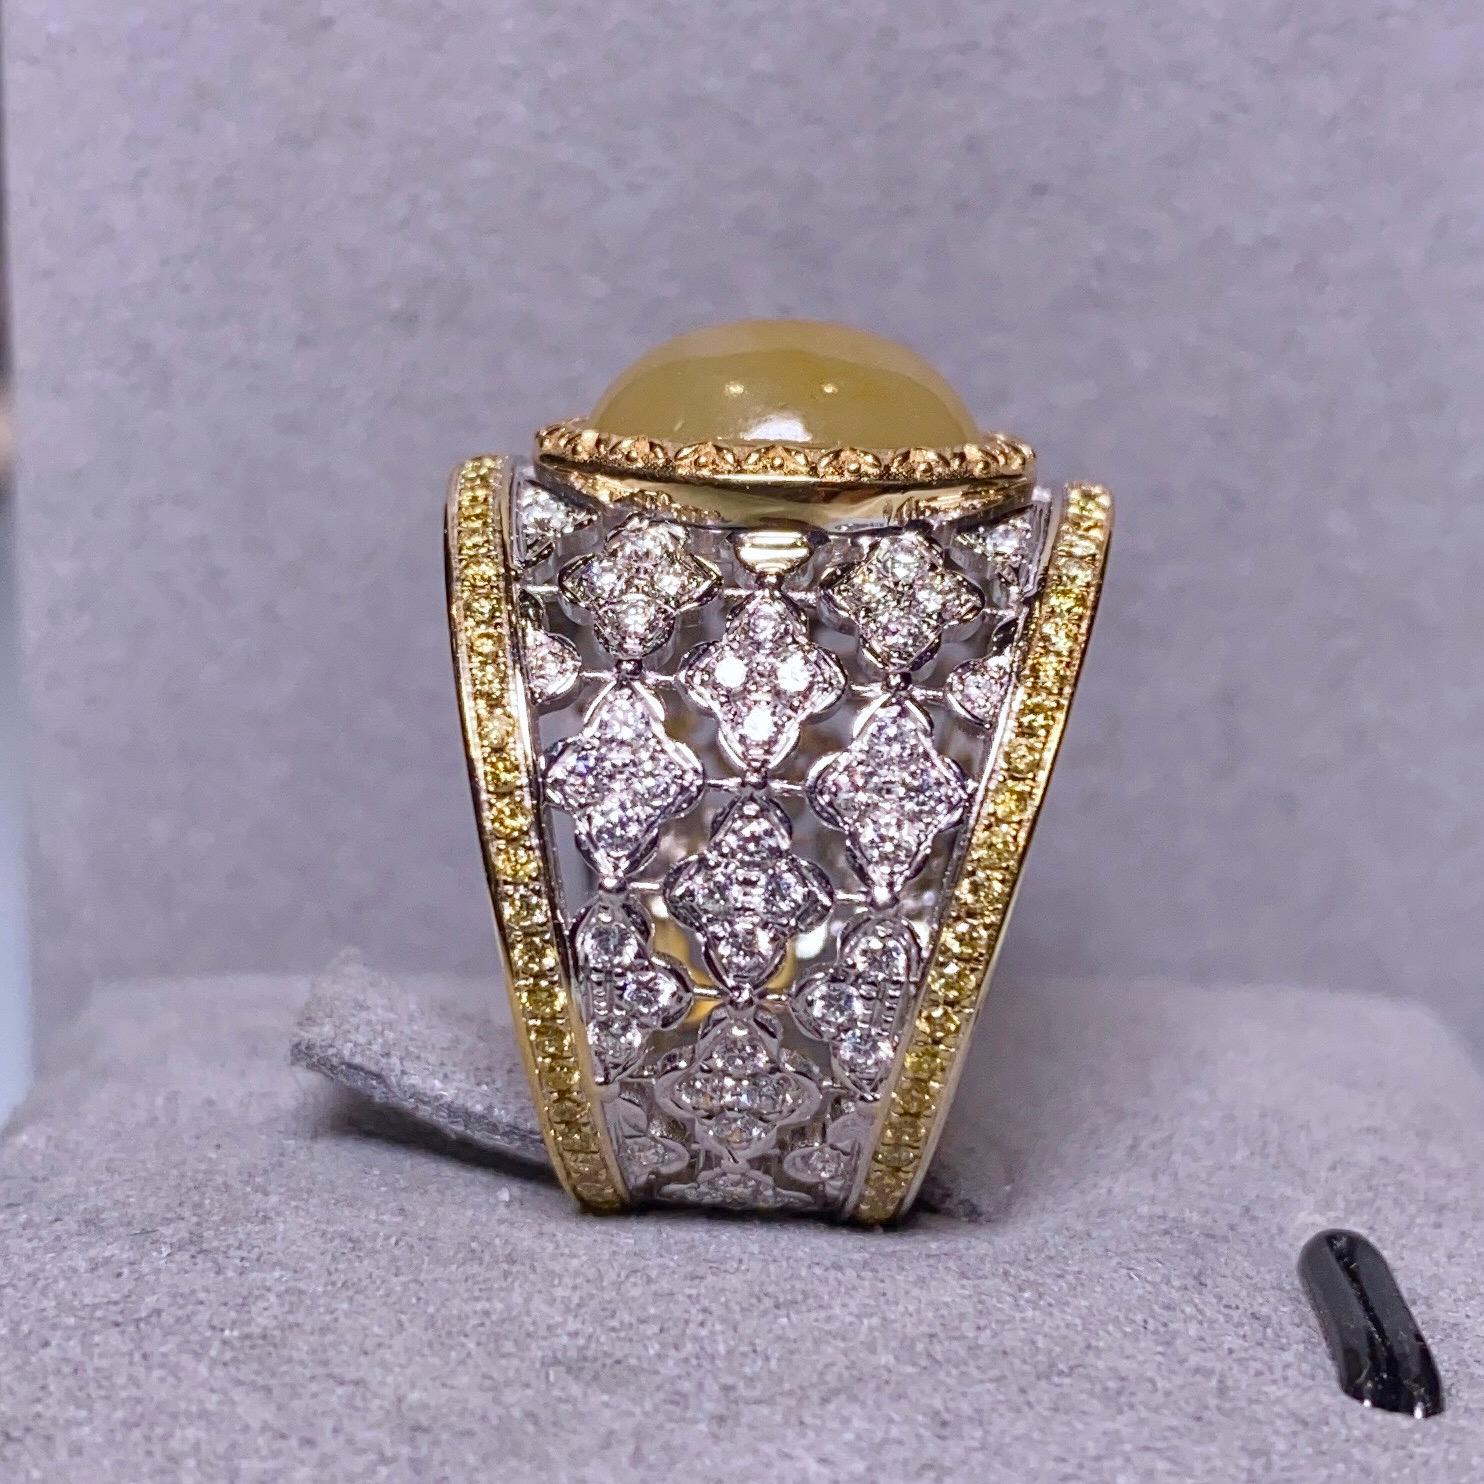 This is a big statement ring as it consist of a big Type A Yellow Jadeite. The Jadeite is surrounded by a circle of Yellow Gold. On the outer layer, there are multiple diamond encrusted flower motif which made up of the main body of the ring. The